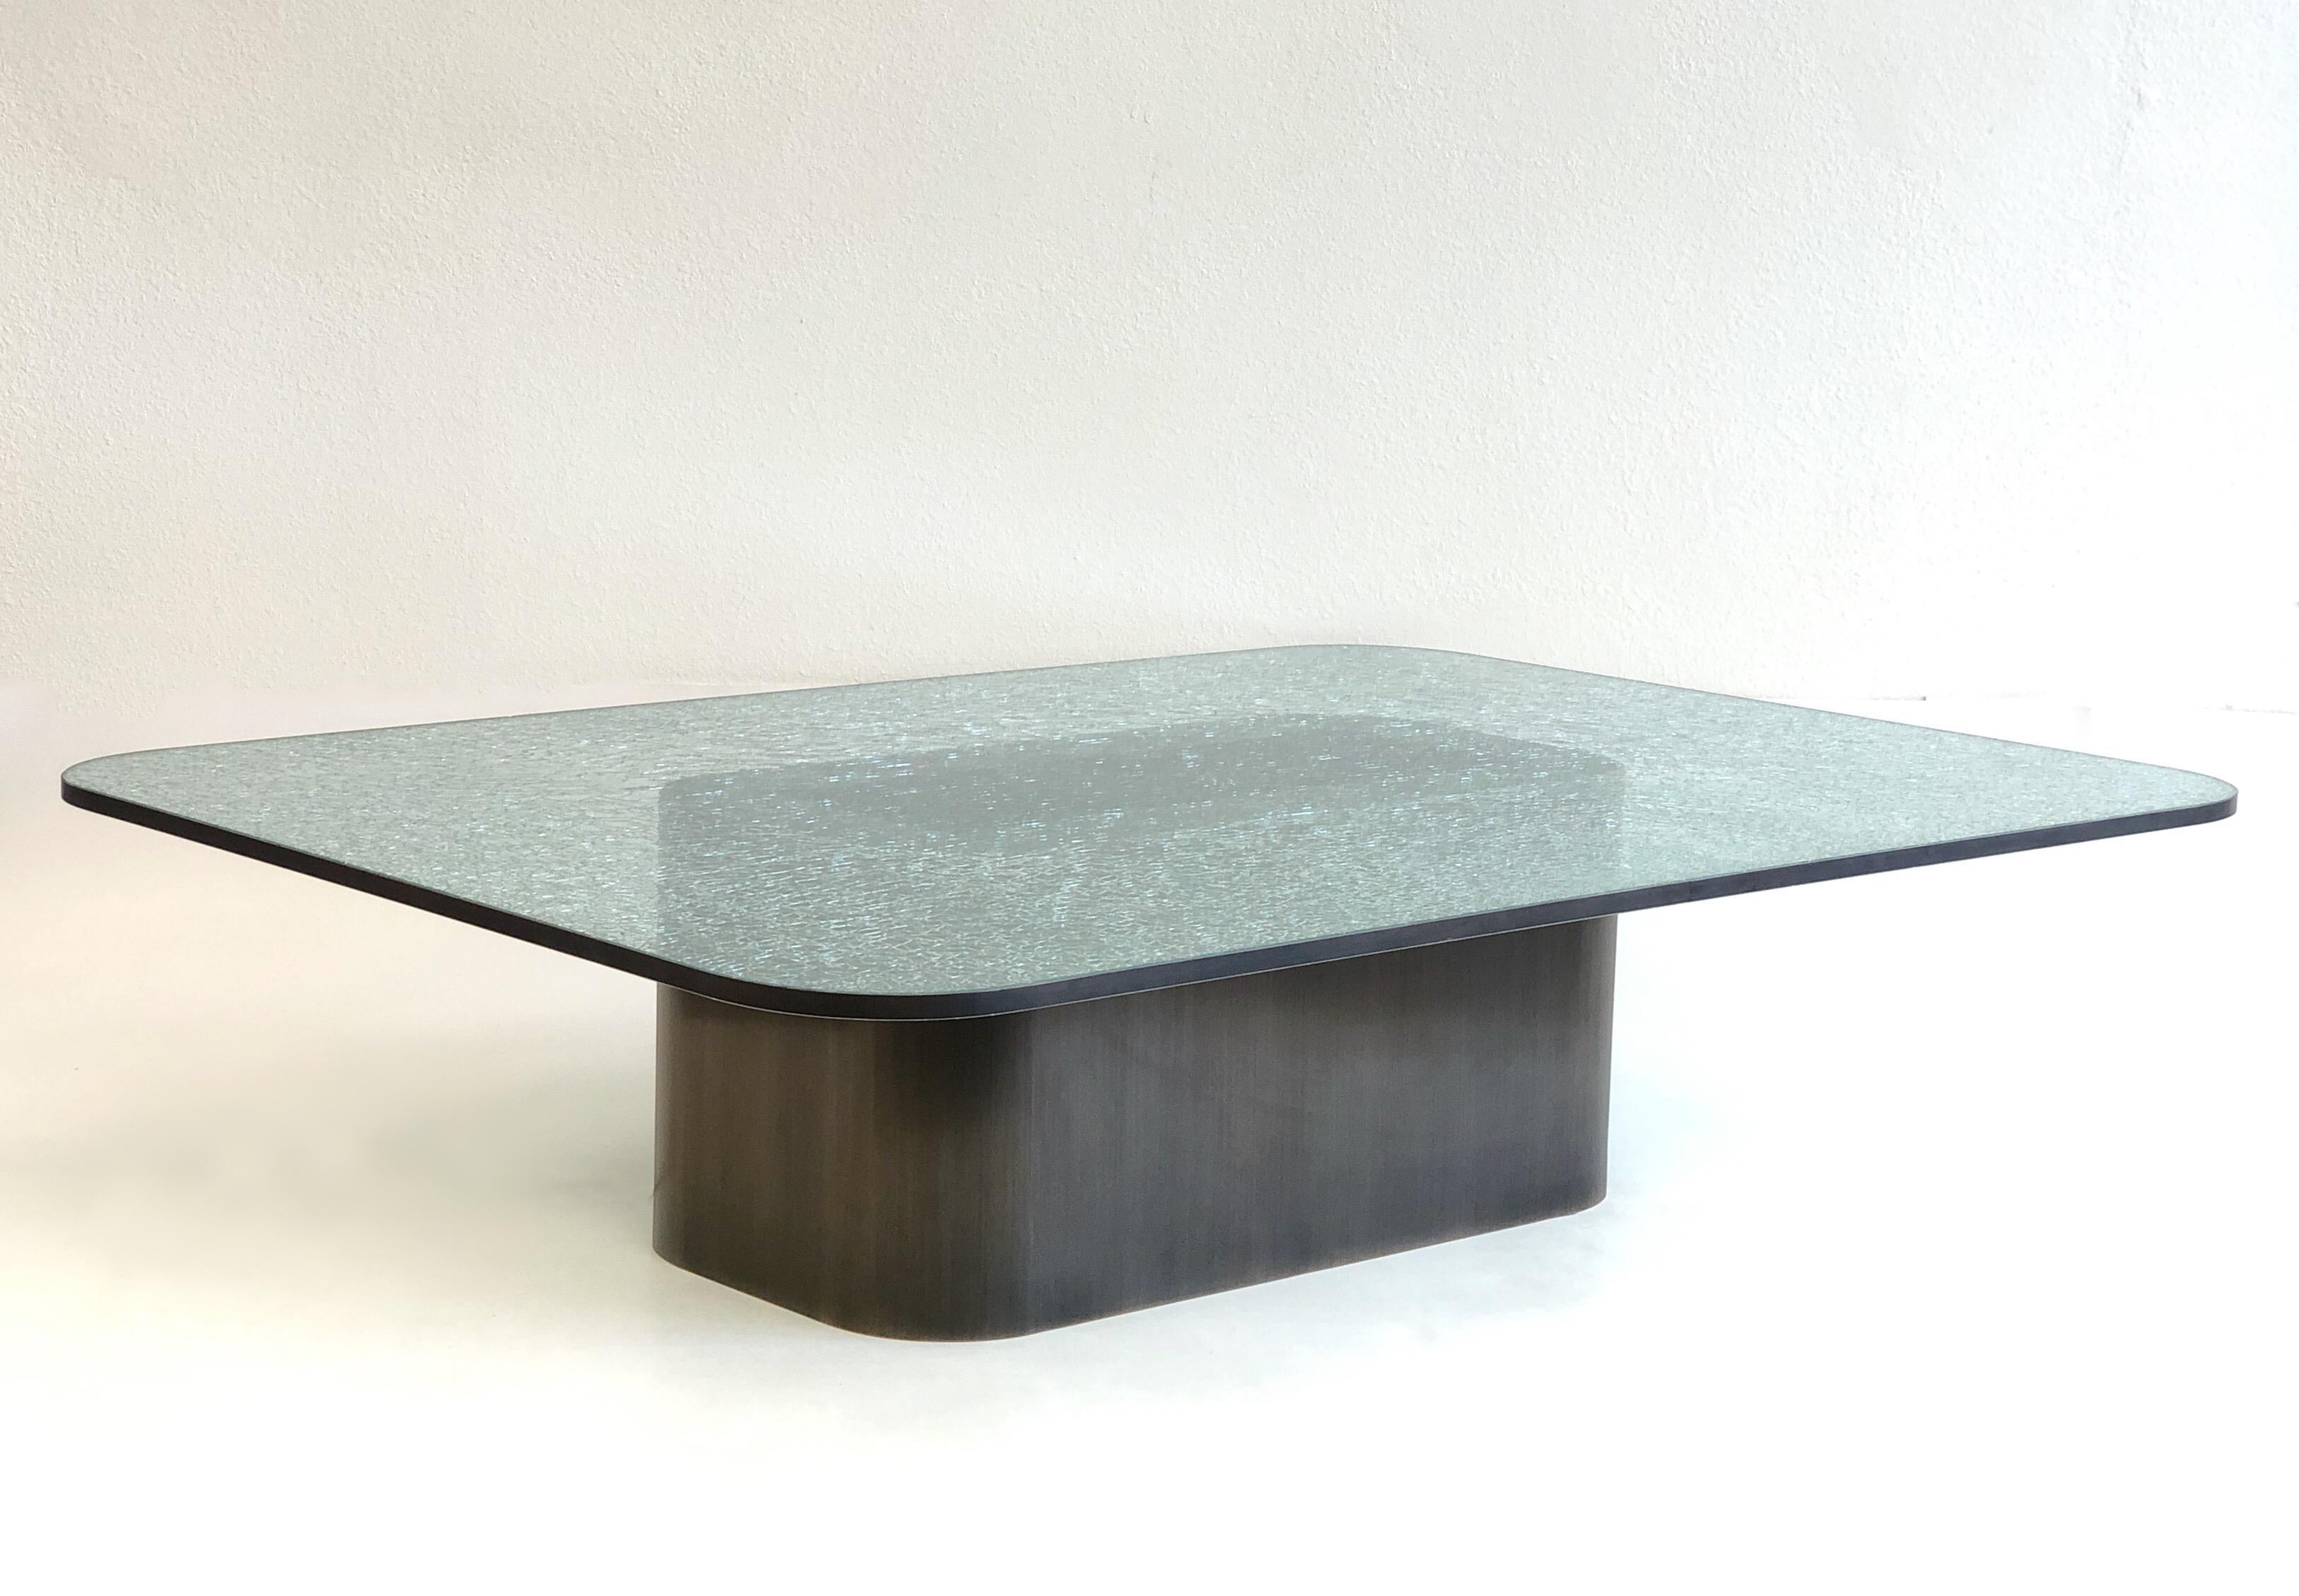 A spectacular 1980s large brushed bronze and crackle glass cocktail table by Renowned designer Steve Chase. 
The table base is brushed bronze and the top is 3/4” thick crackle glass with a brush bronze band around the edge. 
Minor wear on the top.